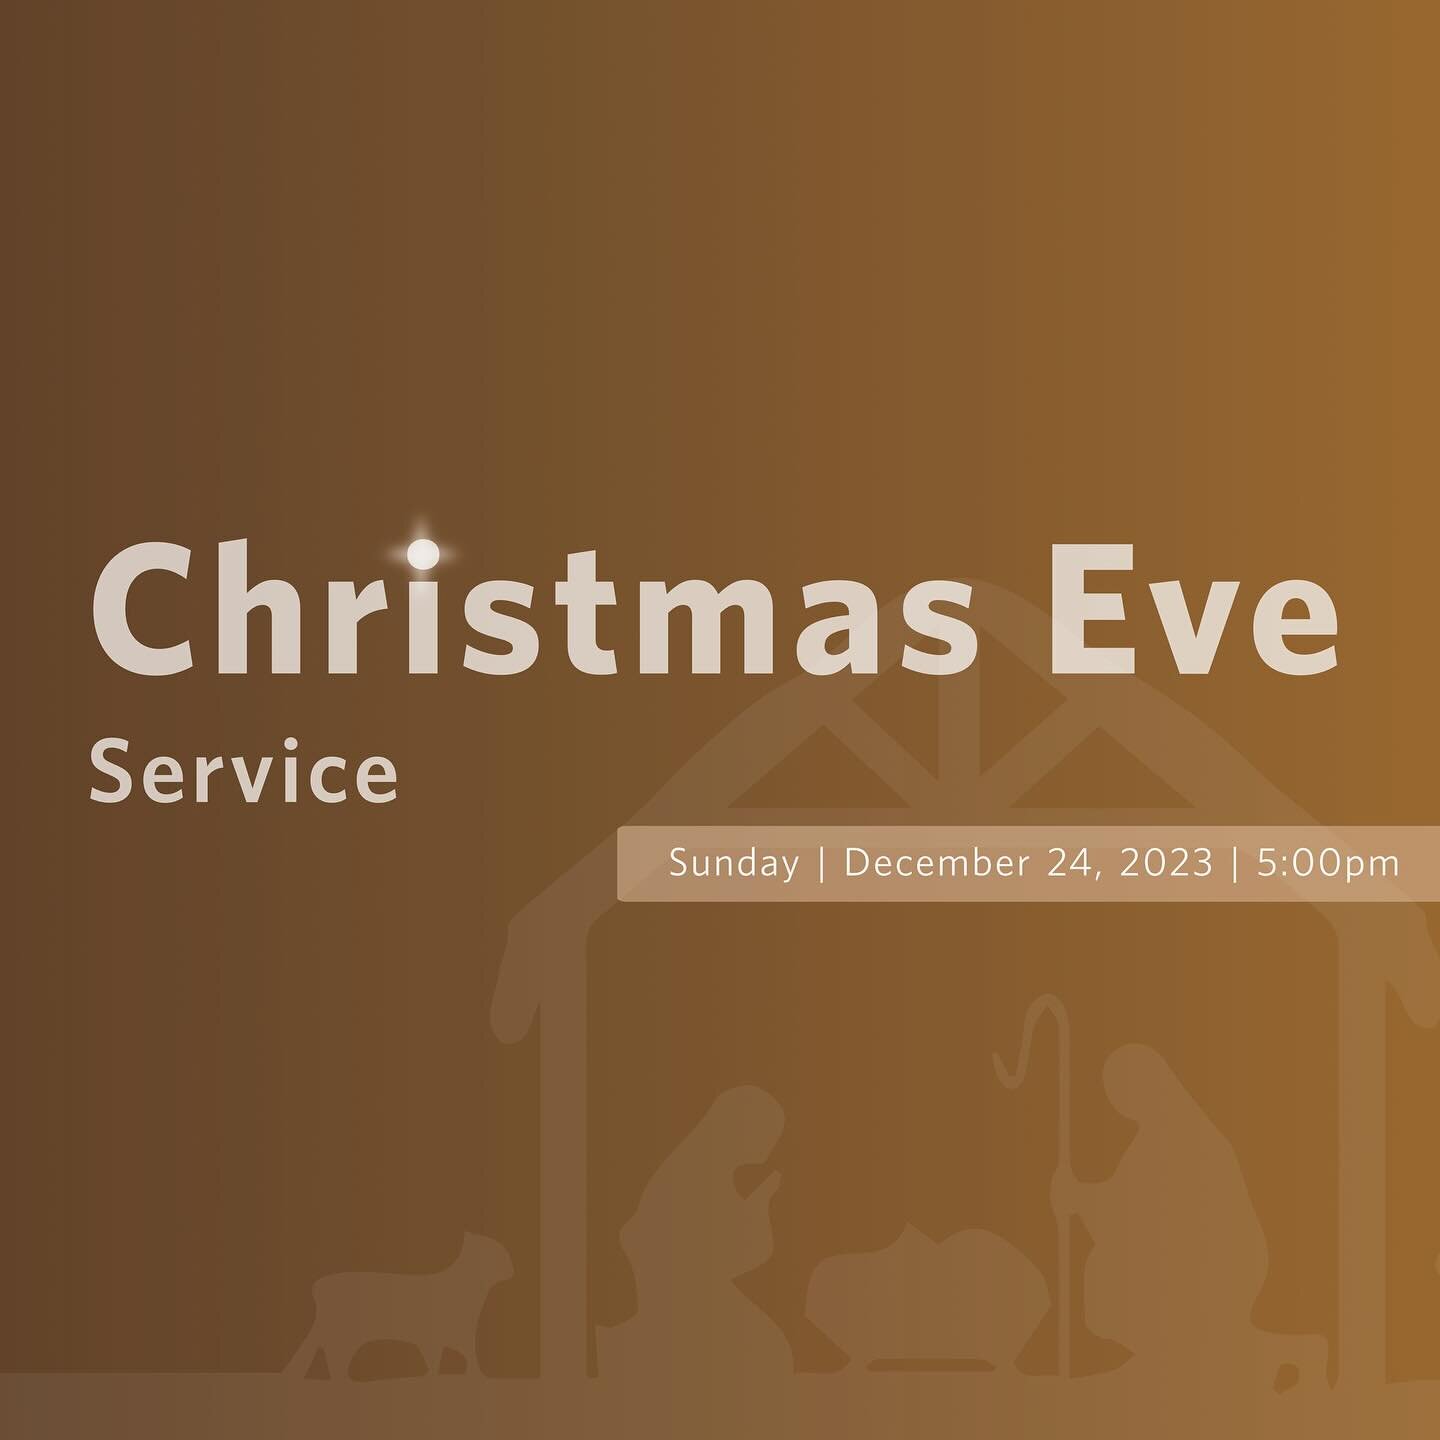 &lsquo;Twas the night before Christmas, when all through the house...

Everyone was getting ready to head to CFC for our Christmas Eve service on Sunday, December 24th at 9:30 AM! We look forward to celebrating this joyous occasion together as a chur